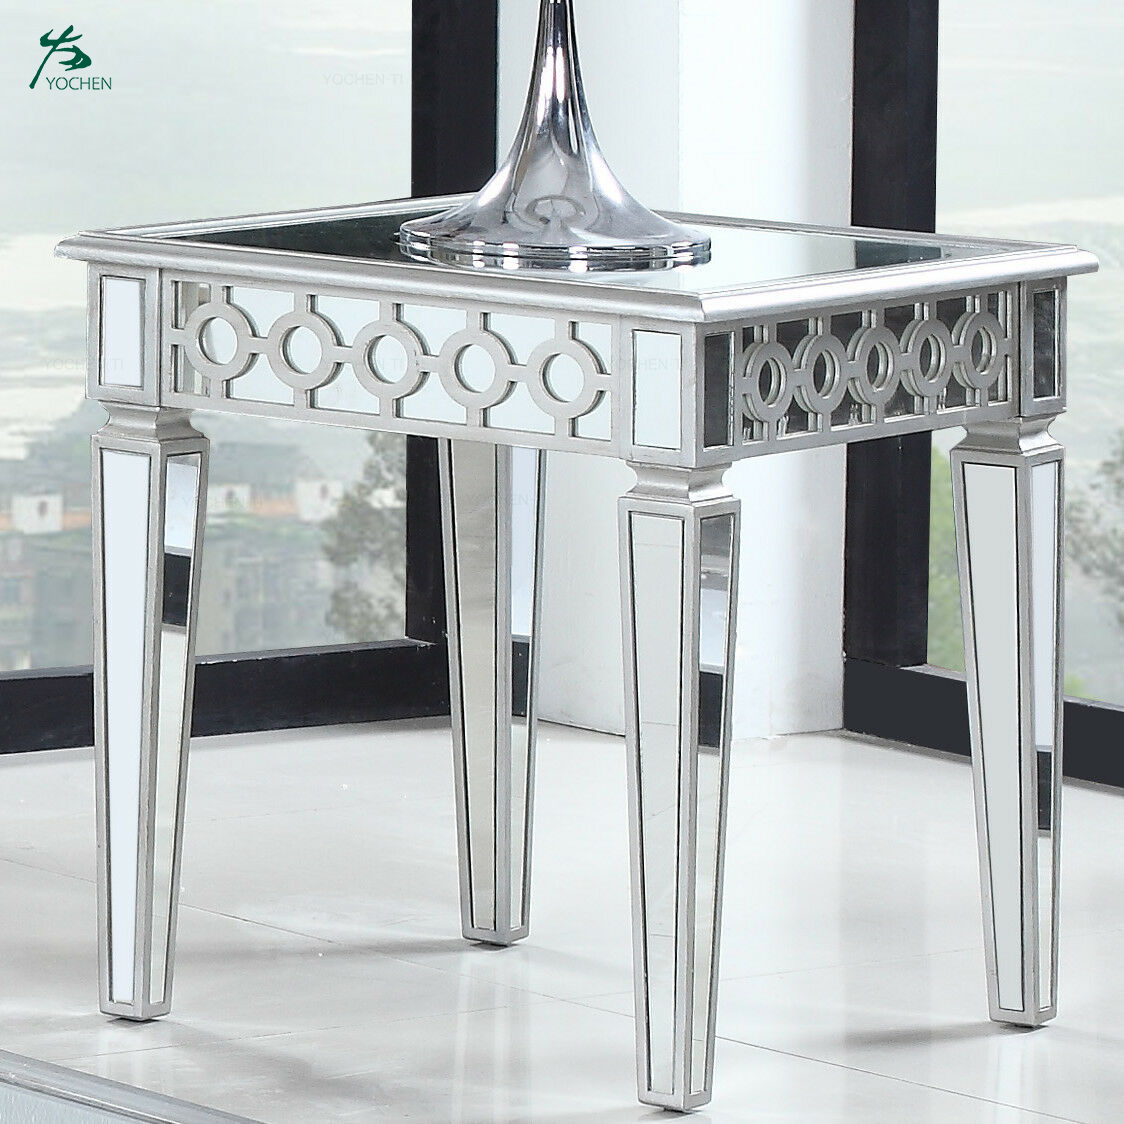 Great Mirror Contemporary Living Room Furniture Modern Mirrored Coffee Table